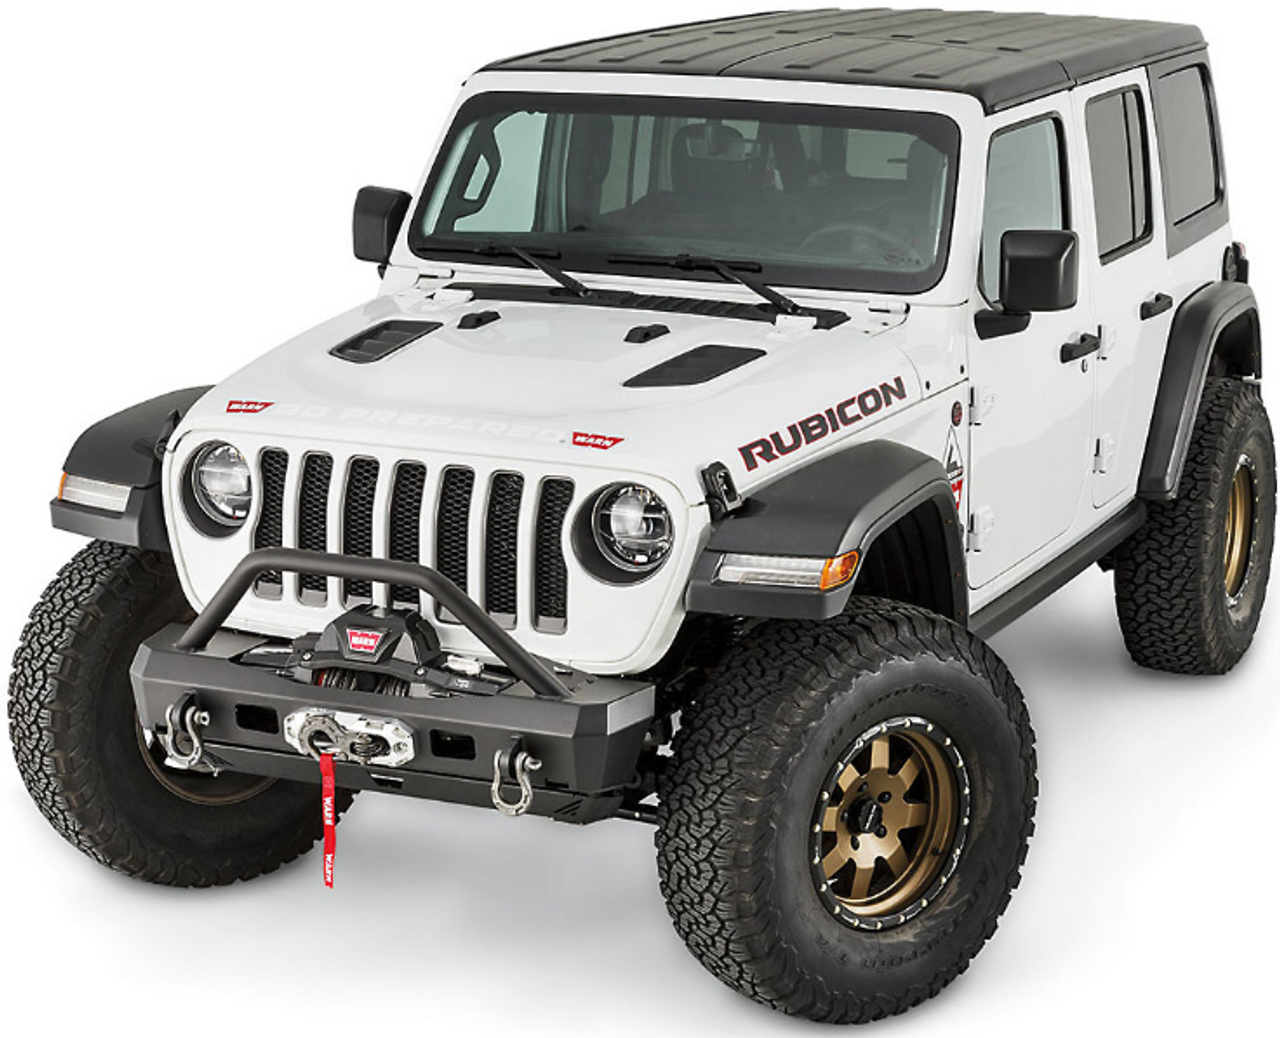 WARN 101330 Elite Series Stubby Front Bumper with Grille Guard for Jeep Wrangler JL & Gladiator JT 2018+